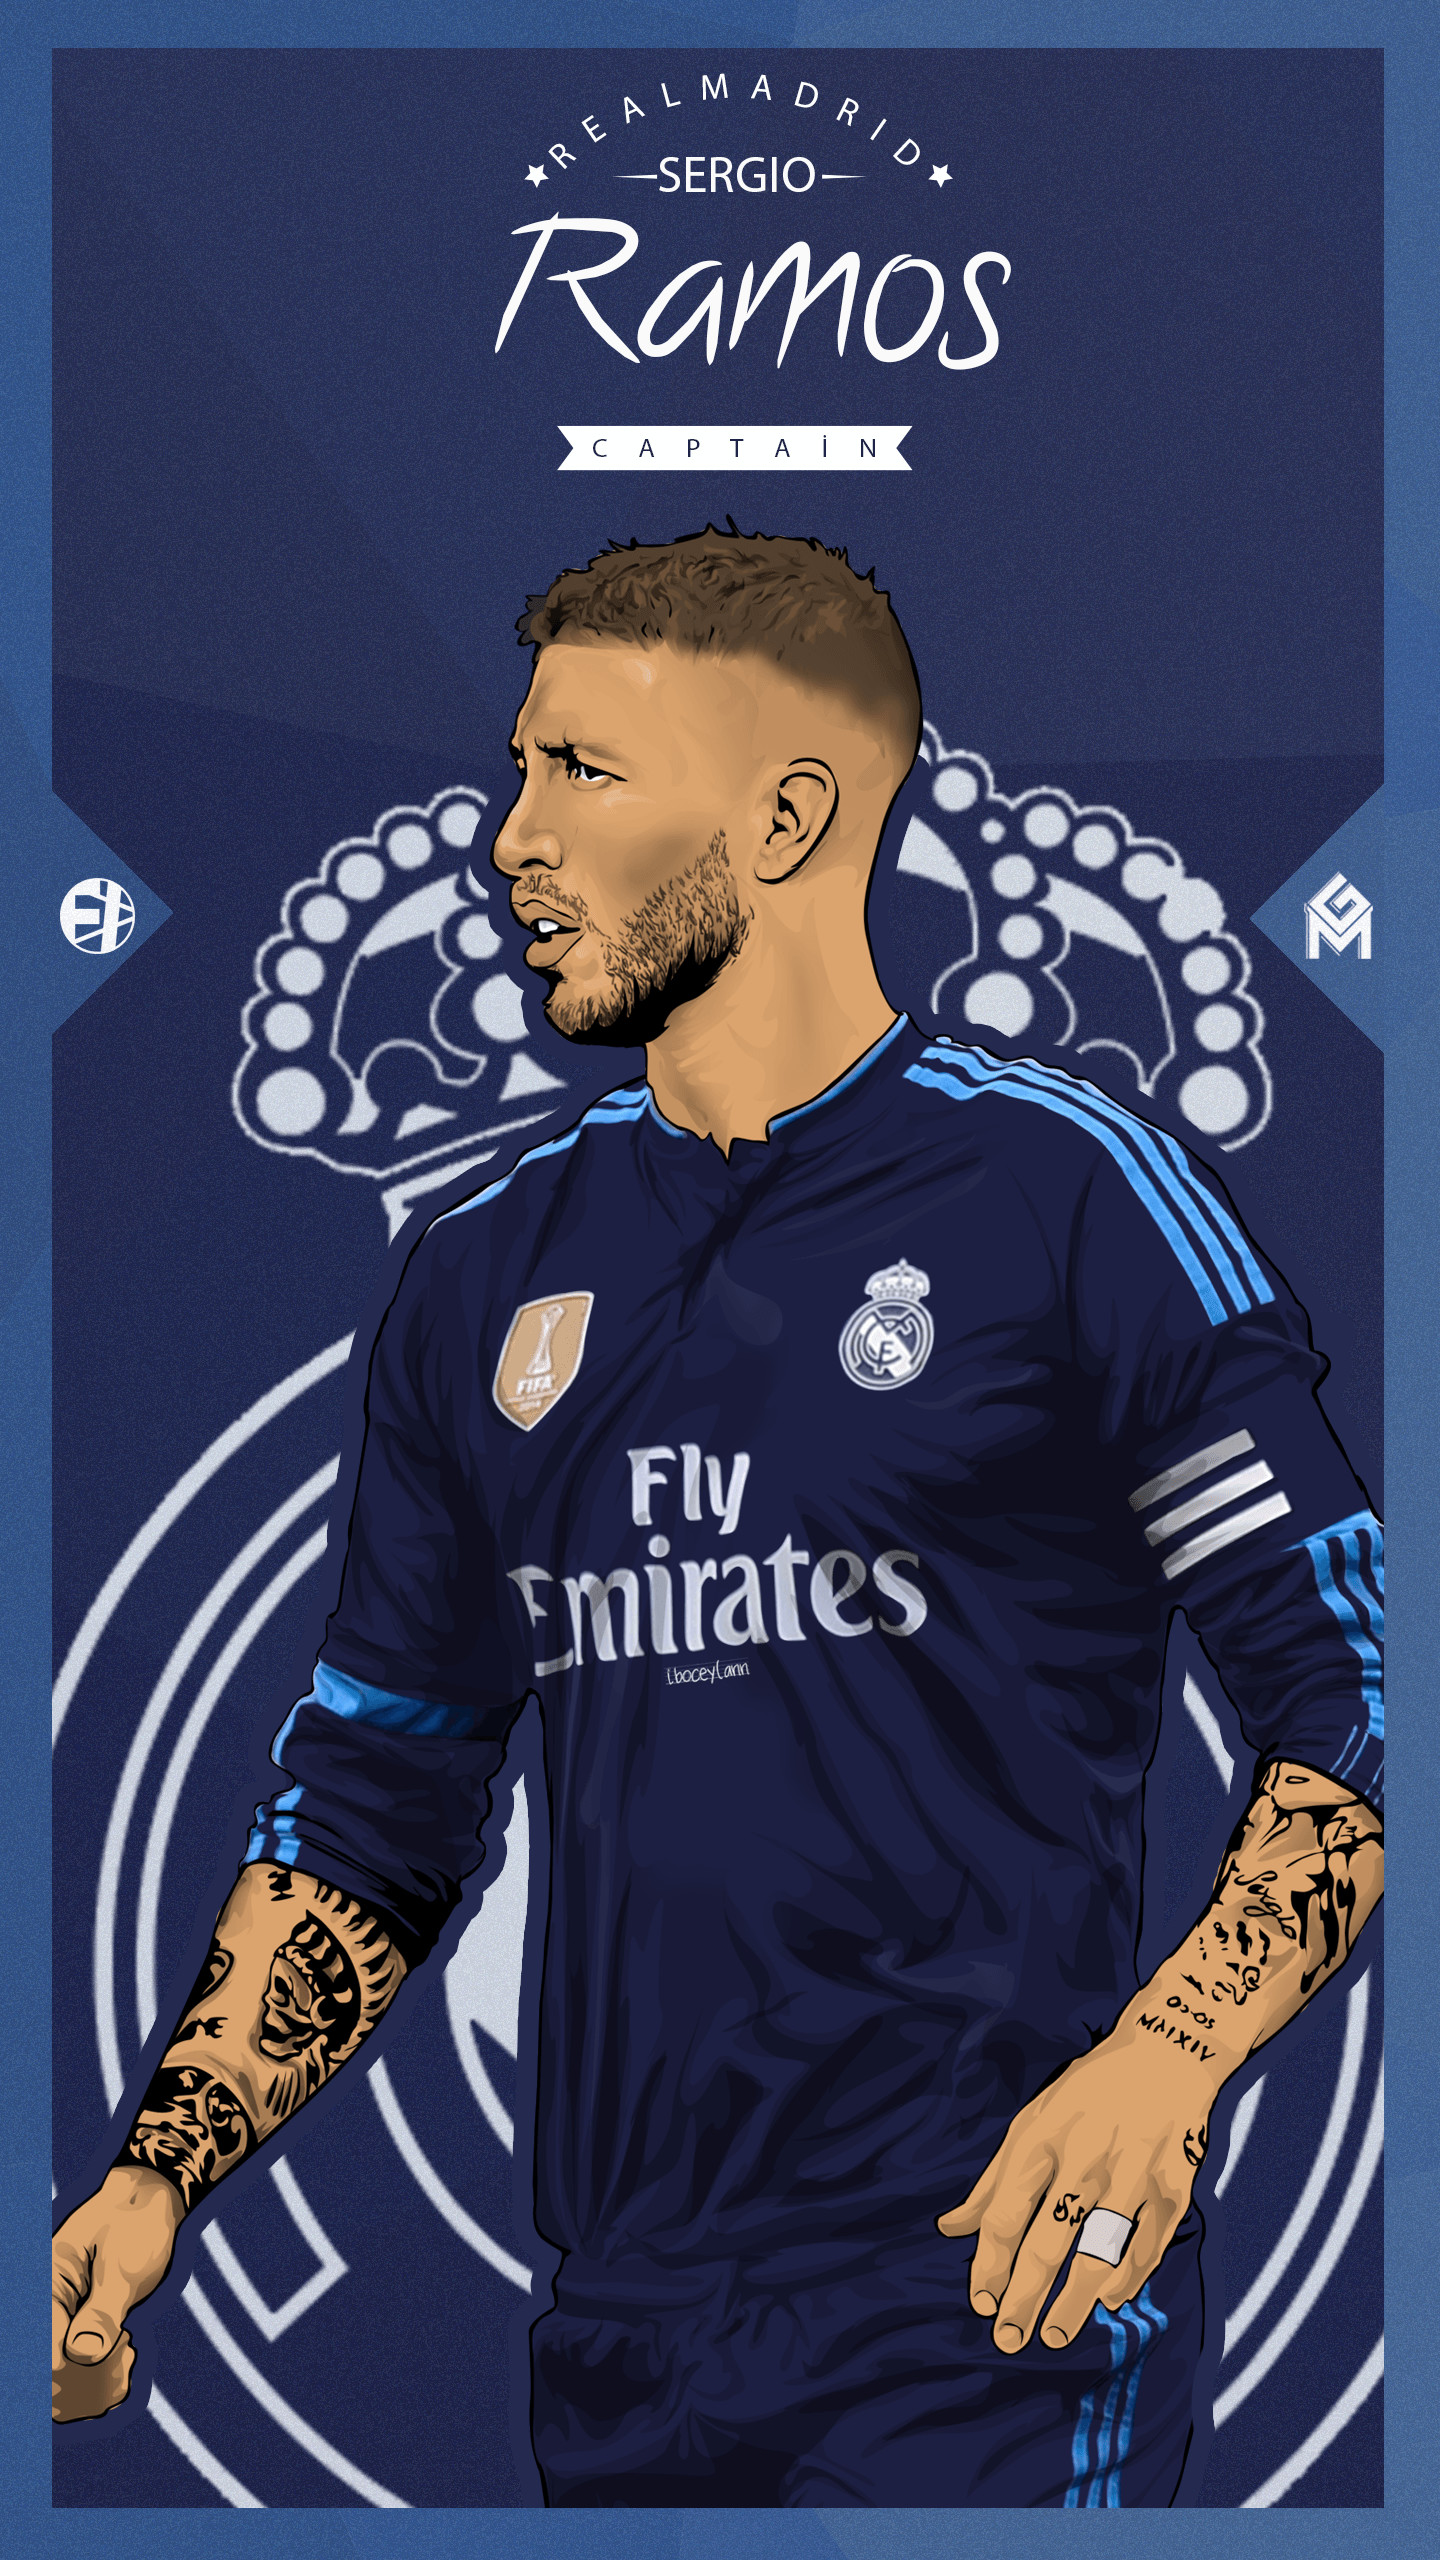 1440x2560 Sergio Ramos Vector by fimgraphic on DeviantArt